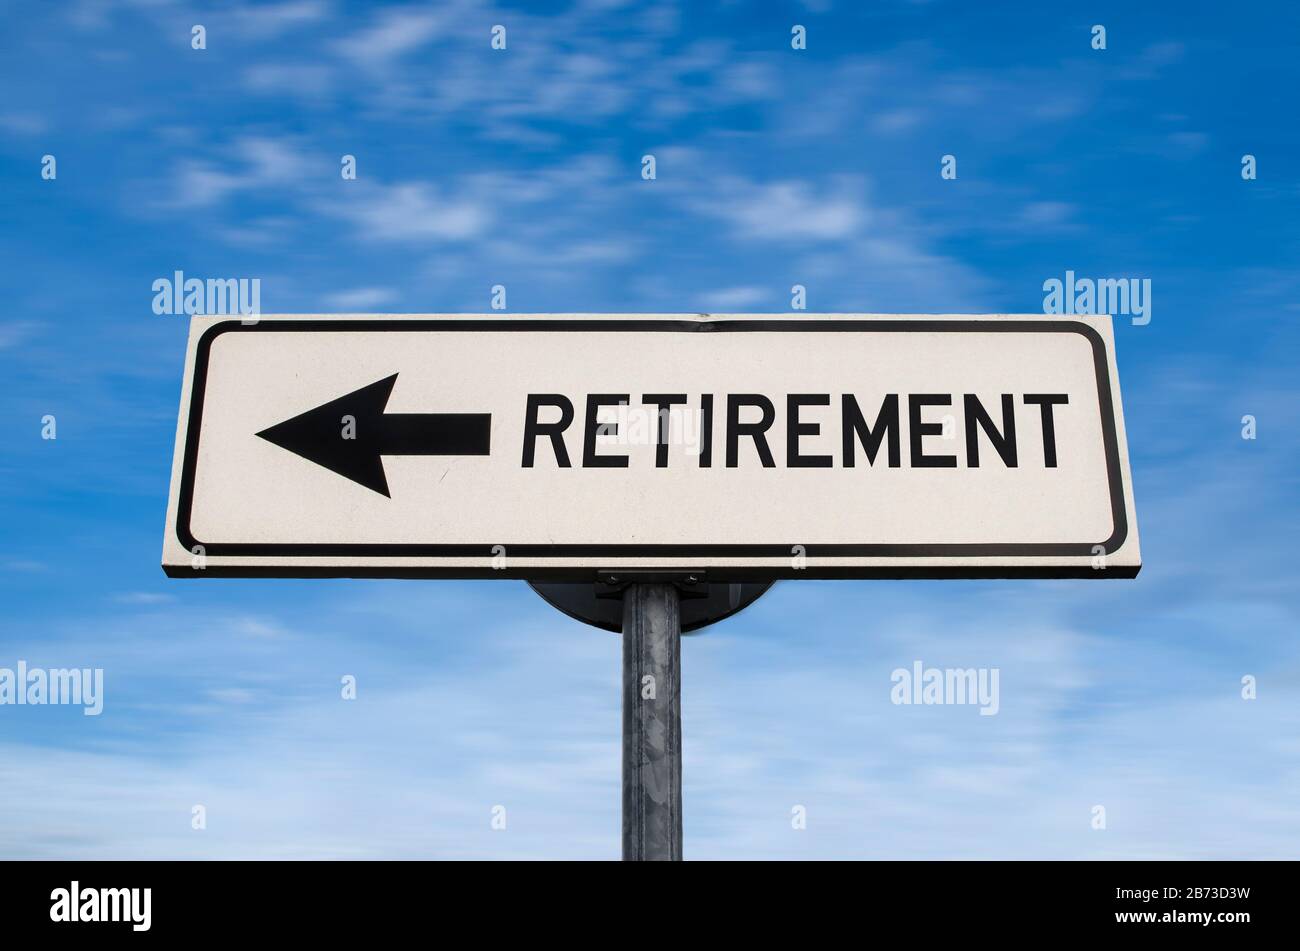 Retirement road sign, arrow on blue sky background. One way blank road sign with copy space. Arrow on a pole pointing in one direction. Stock Photo